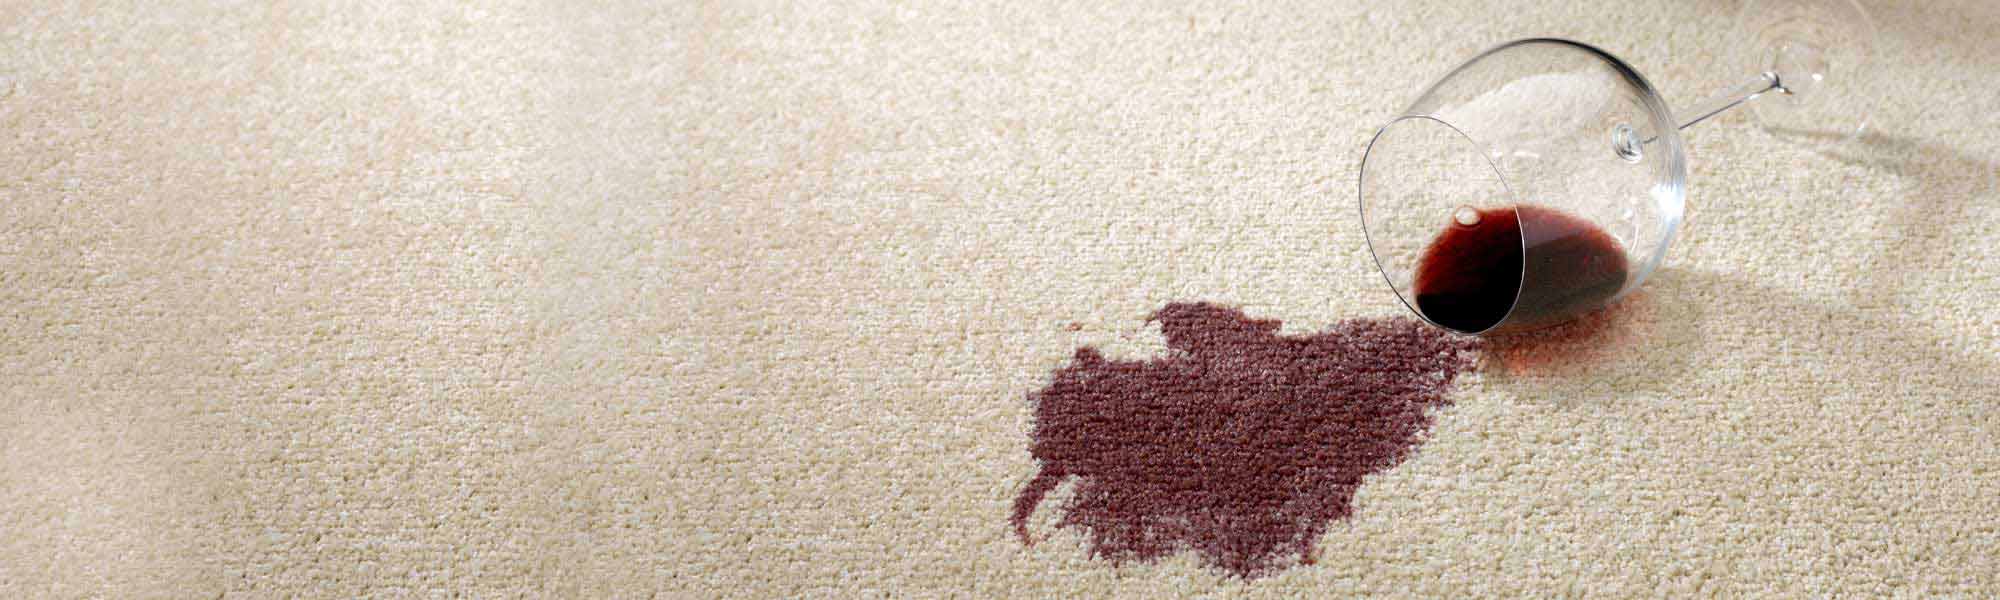 Professional Stain Removal Service by Finn's Chem-Dry